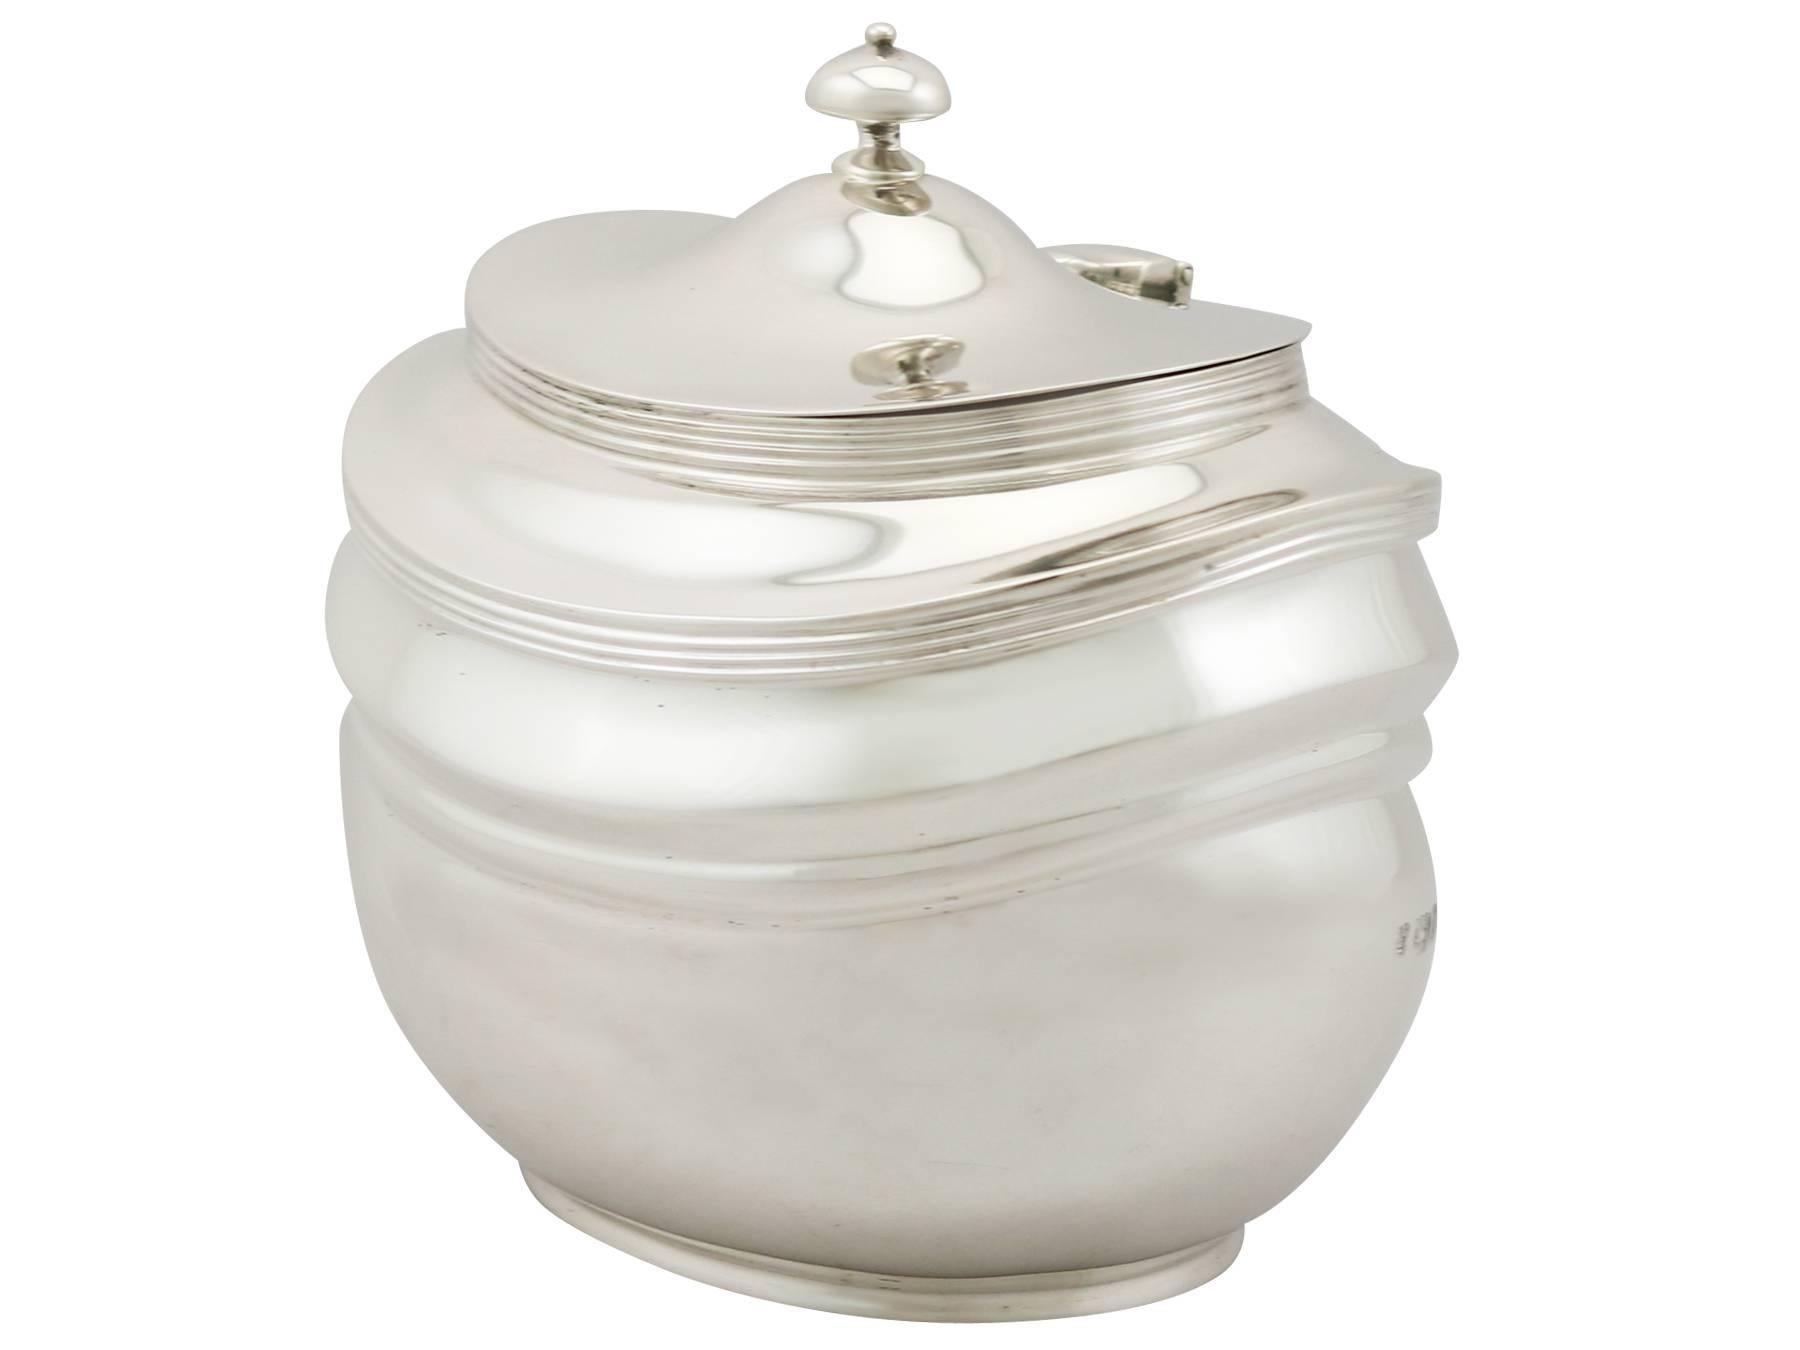 An exceptional, fine and impressive antique Edwardian English sterling silver tea caddy made by C S Harris & Sons Ltd; an addition to our silver teaware collection

This exceptional antique Edwardian silver tea caddy, in sterling standard, has a